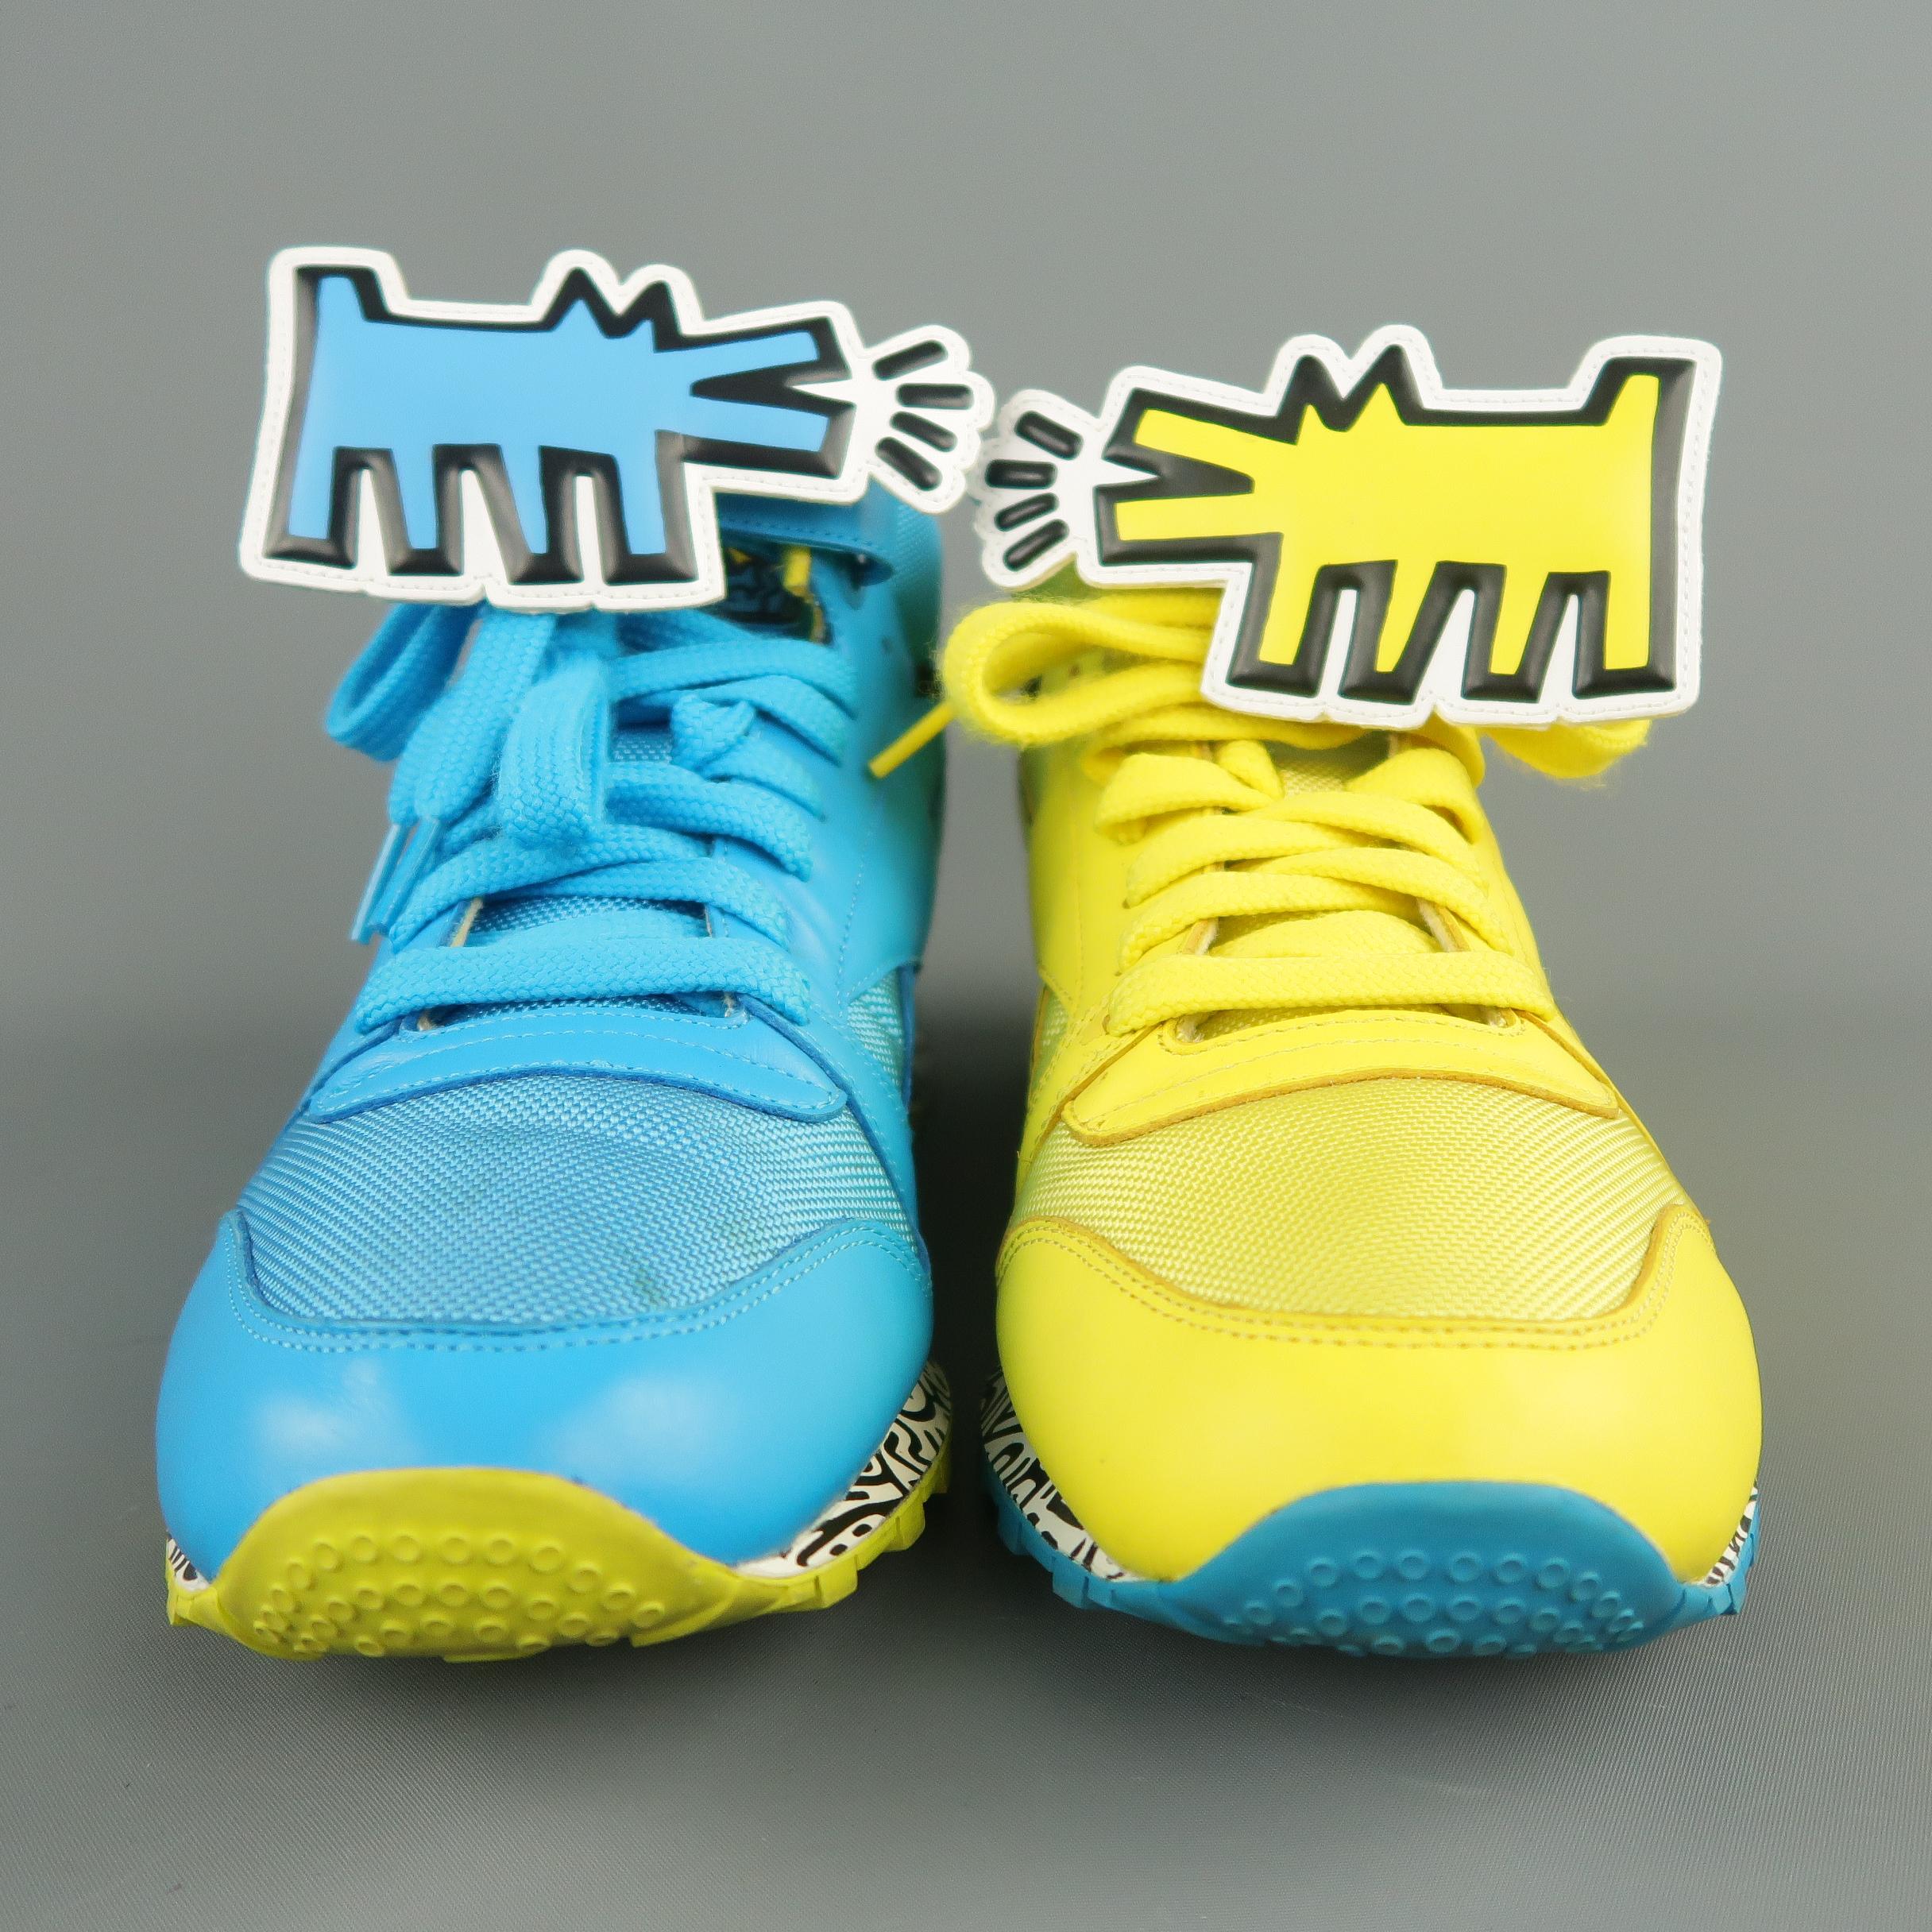 Special edition KEITH HARING FOUNDATION X REEBOK collaboration trainers come in yellow and aqua blue leather and canvas with a black and white scribble print sole, lace up front, and velcro strap with dog barking patch.
 
Excellent Pre-Owned